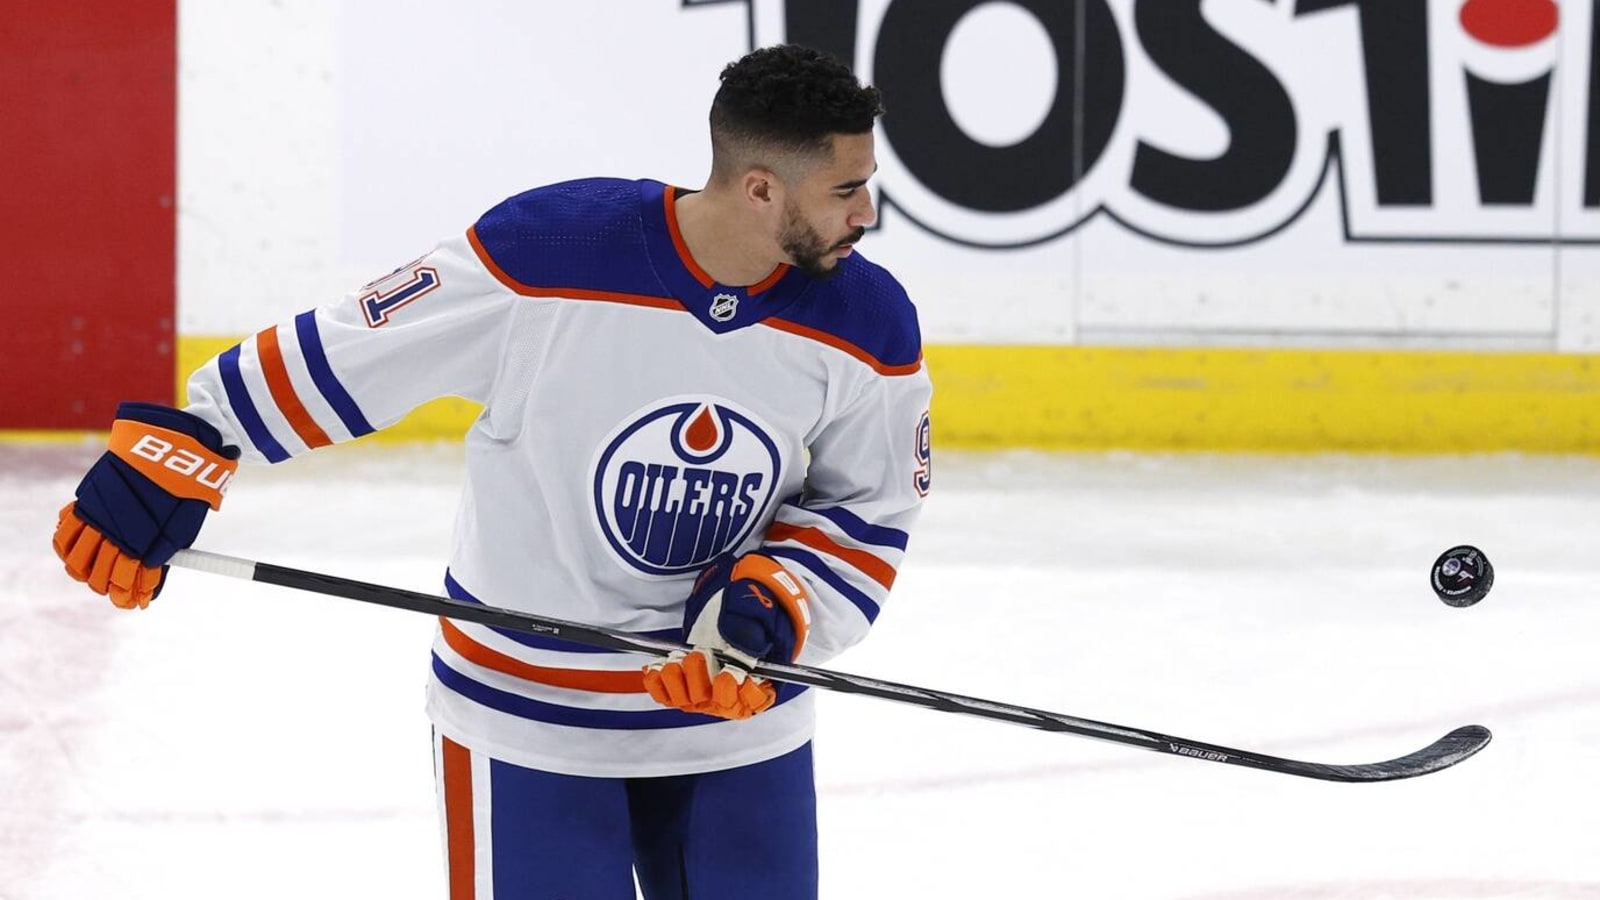 Frank Seravalli discusses why Evander Kane was healthy scratched and his future with the Edmonton Oilers